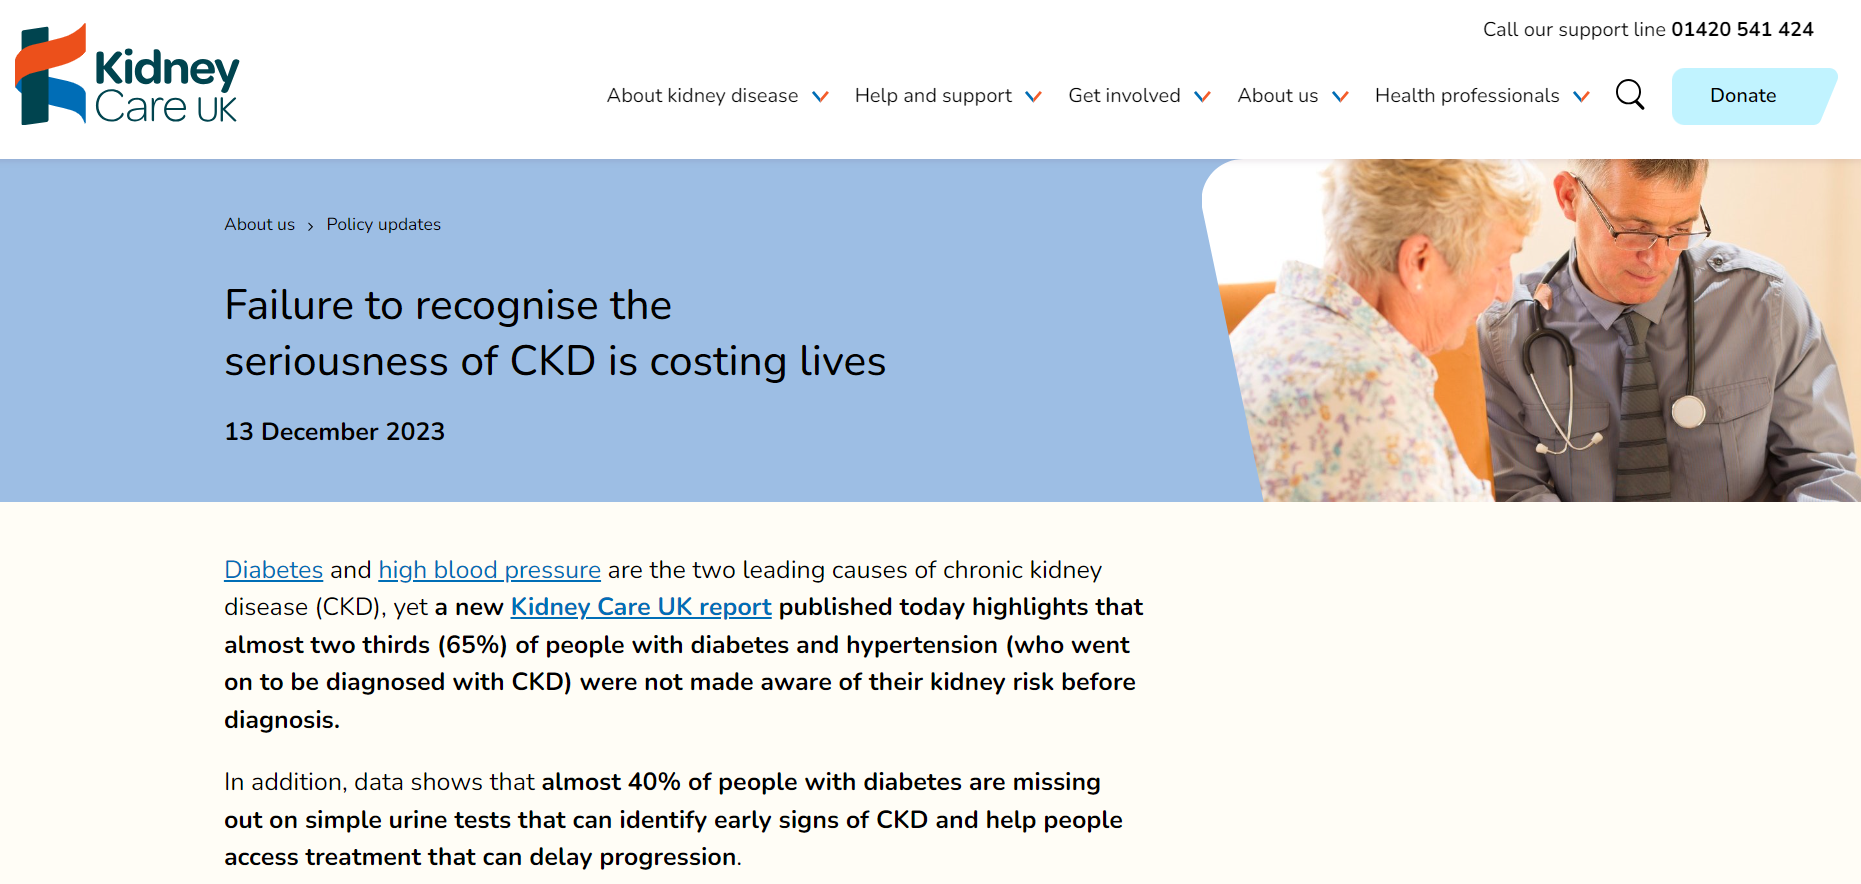 Failure to recognise the seriousness of CKD is costing lives